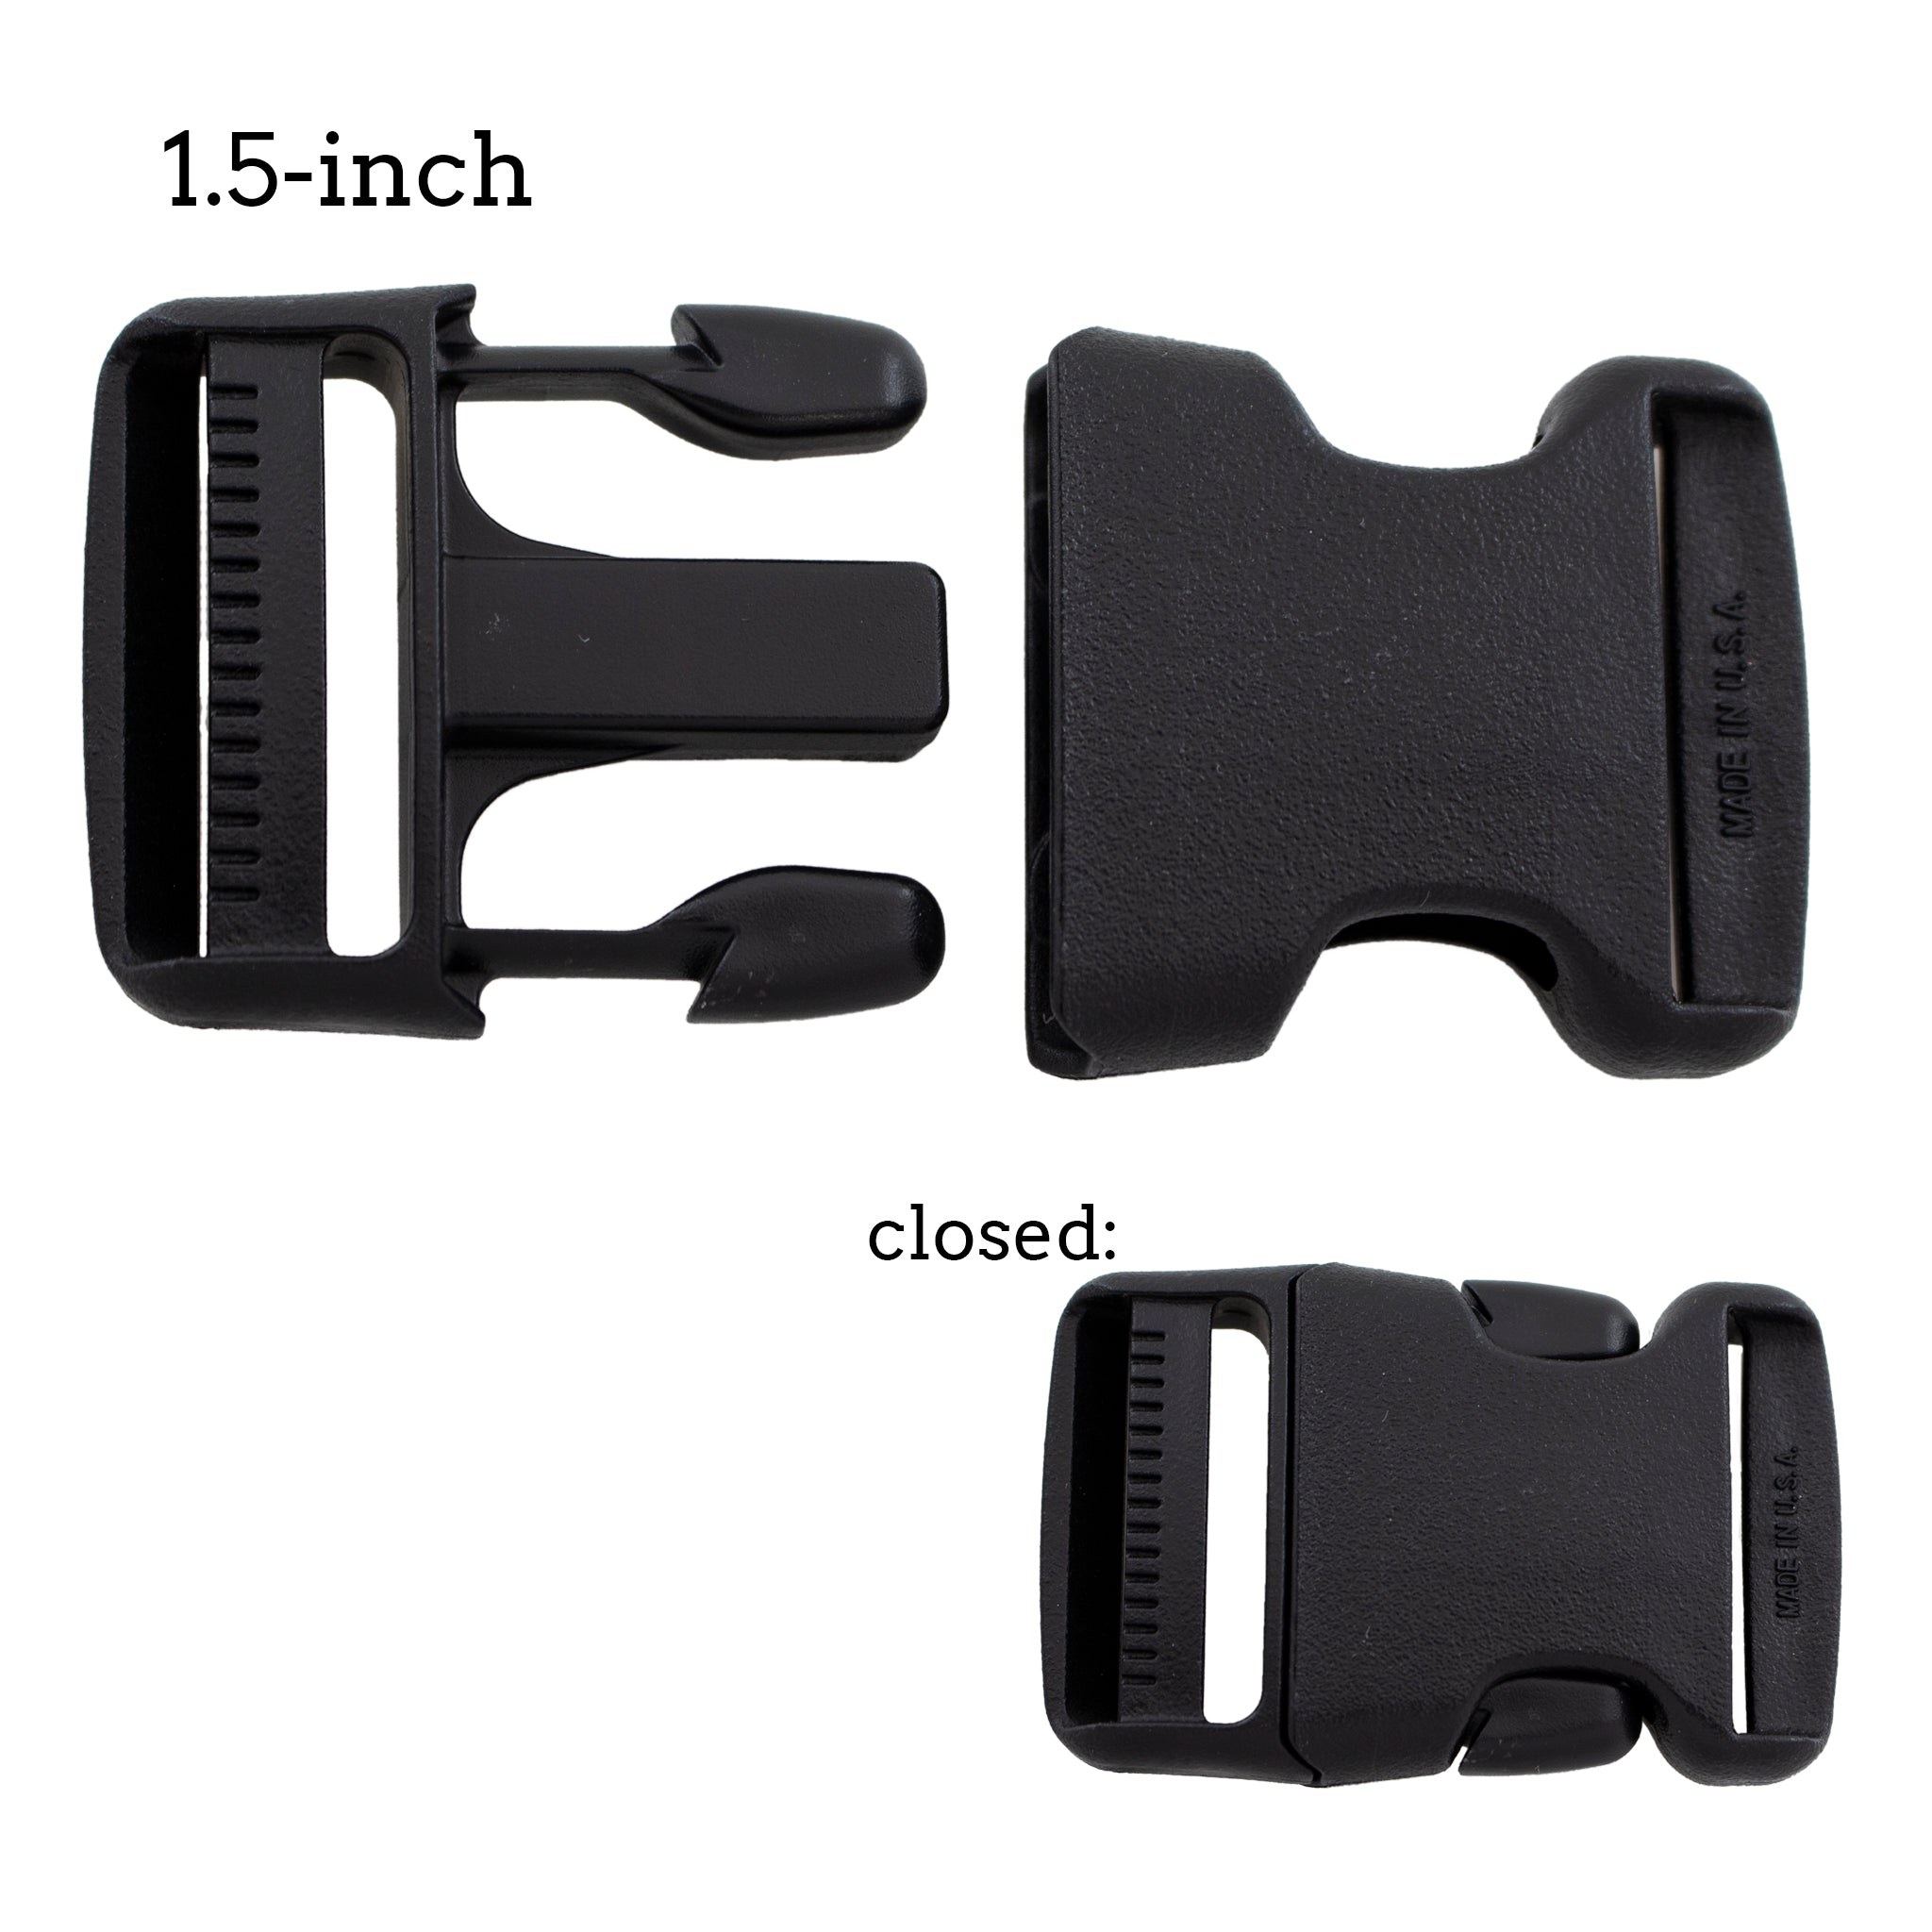 Side Release Buckle Tan, 2 Pcs Replacement Buckles for 1 inch Webbing  Backpack Strap, Heavy Duty Snaps Clips Two-way Adjustable for Boat Cover  Nylon